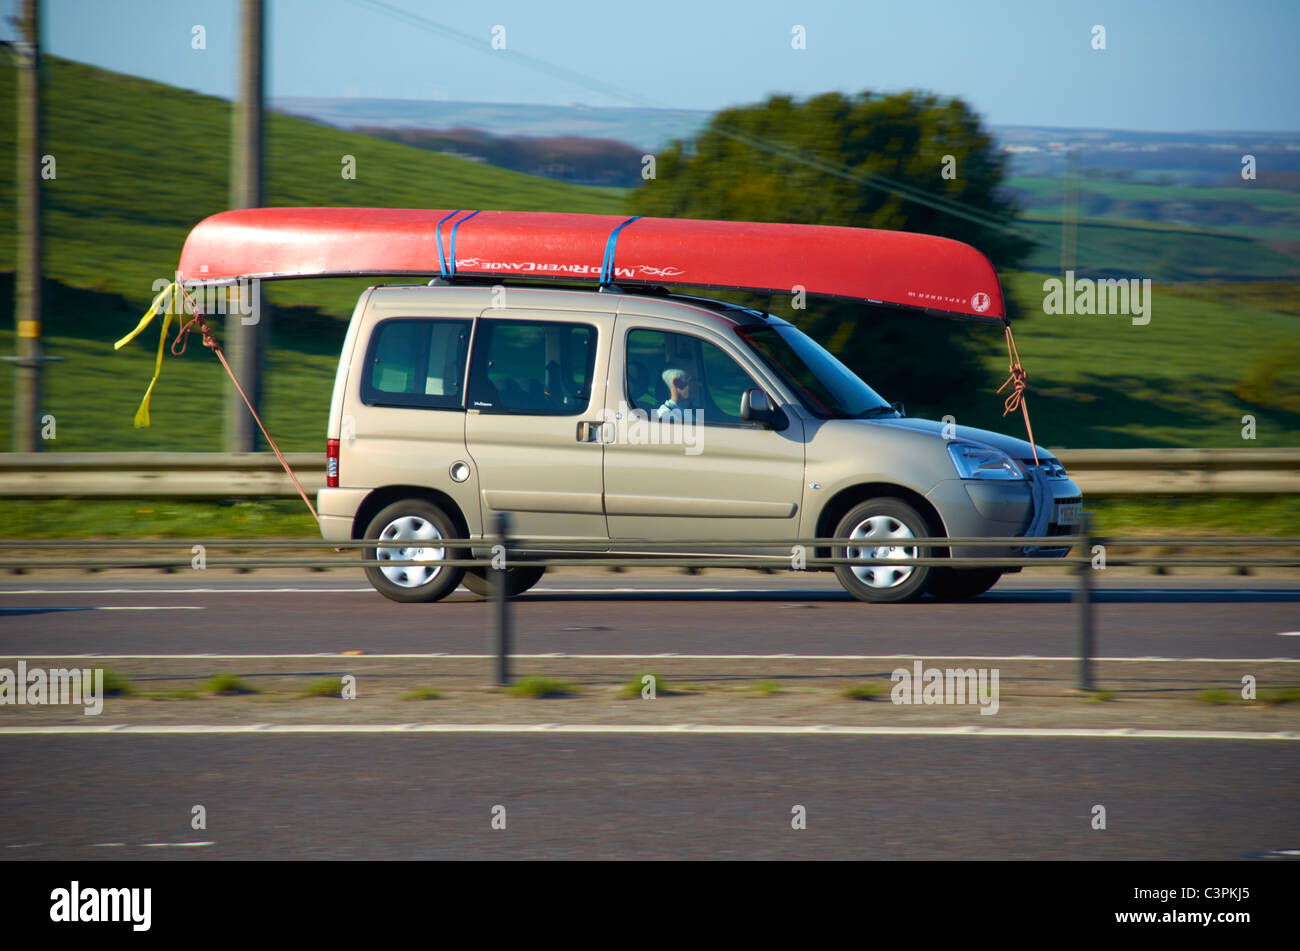 Boat on the roof of a car (on the M62). Stock Photo